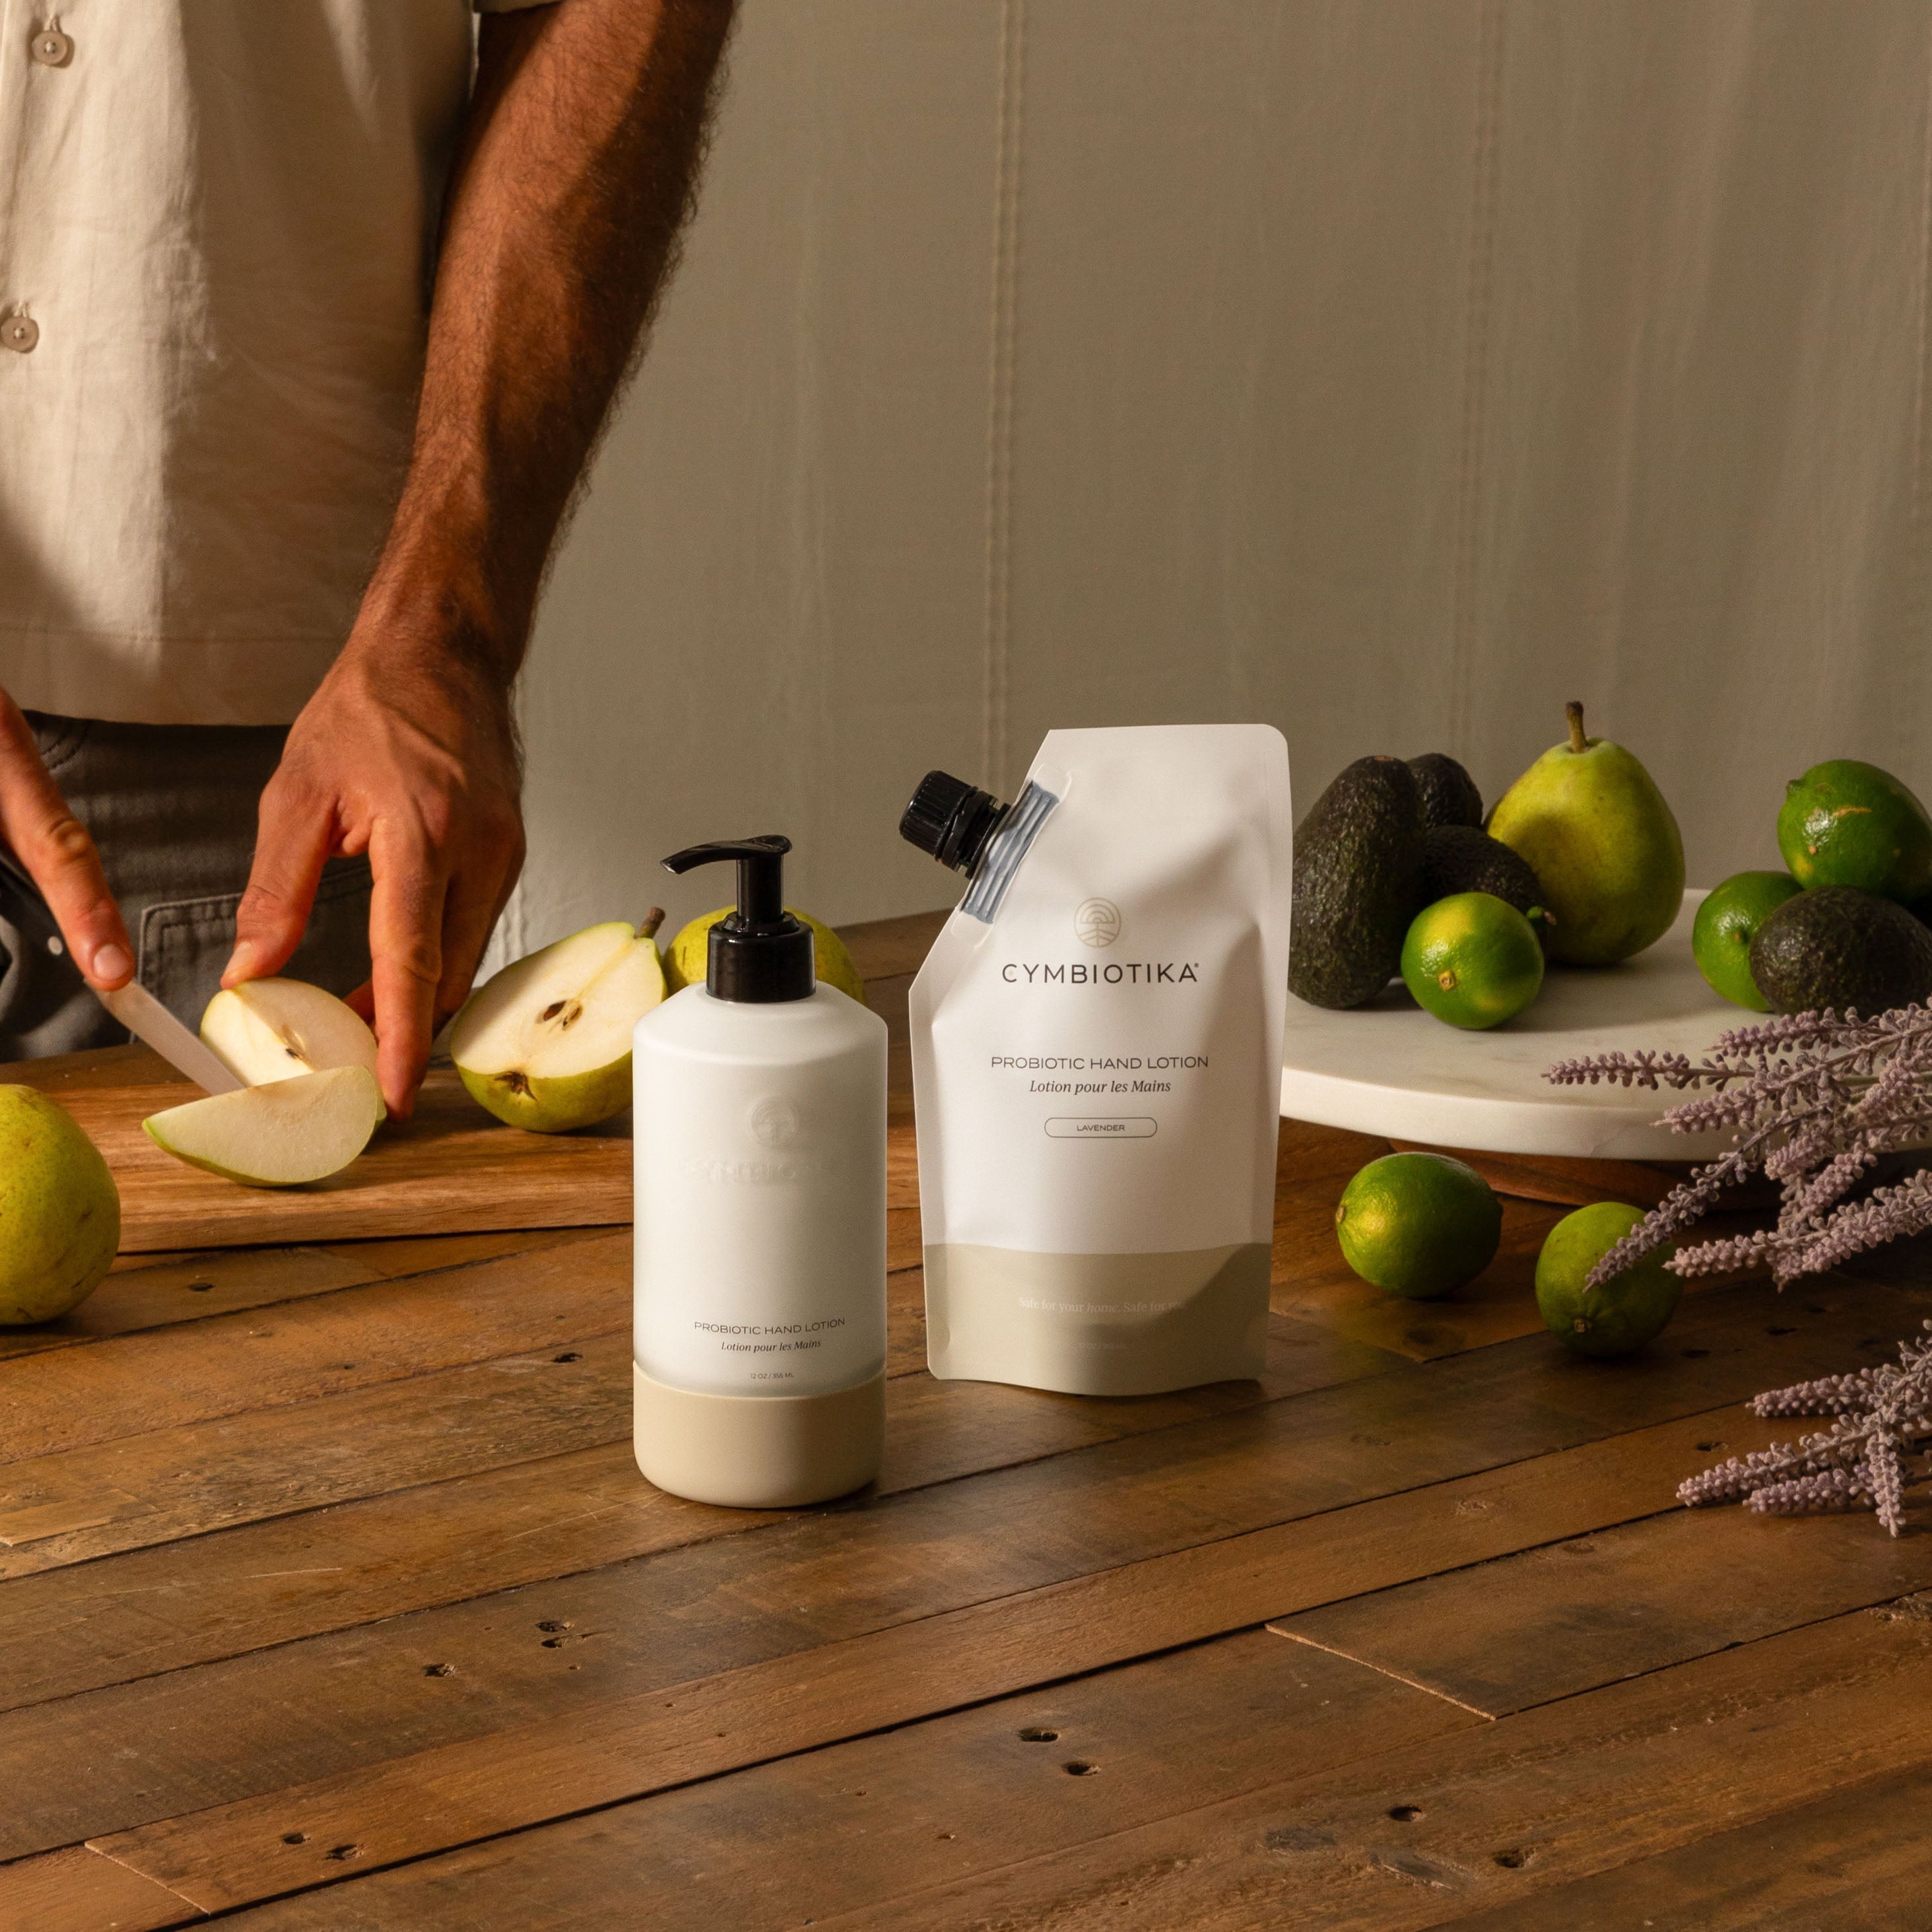 Probiotic Hand Lotion Bottle Neto to Pear being Cut